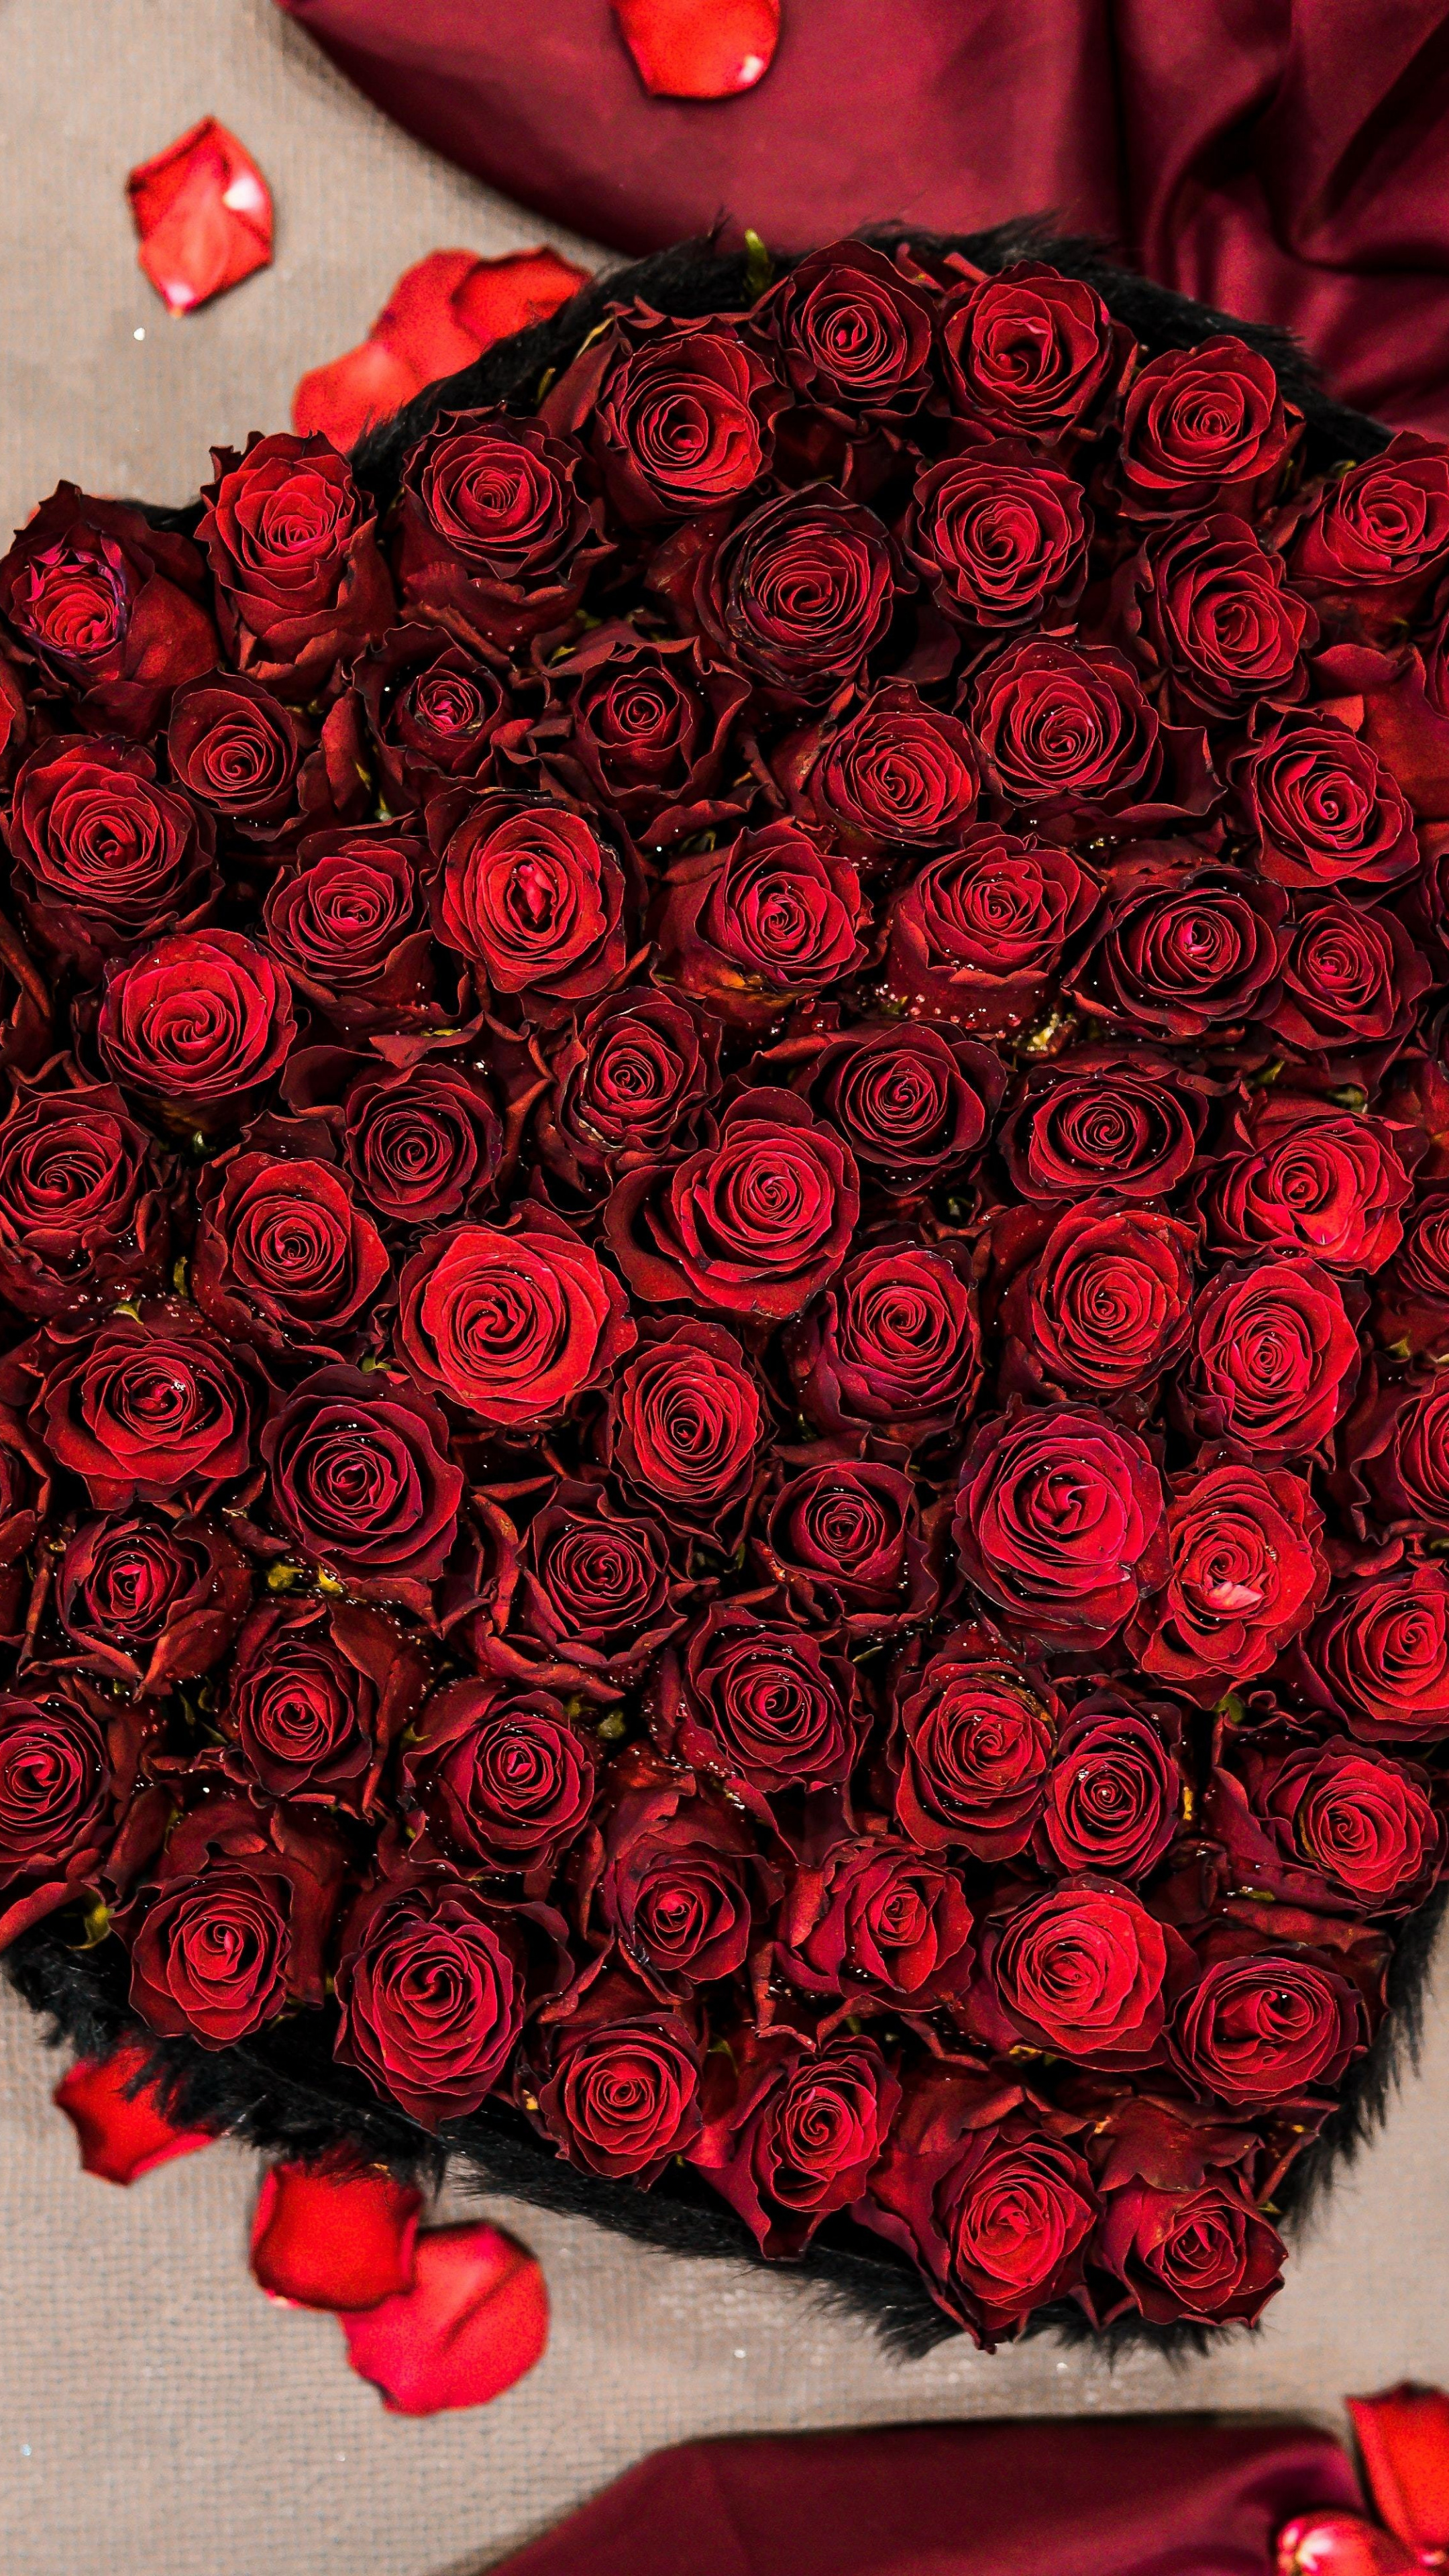 Heart-shaped bouquet, Fresh red roses, Sony Xperia wallpaper, Romantic gesture, 2160x3840 4K Phone